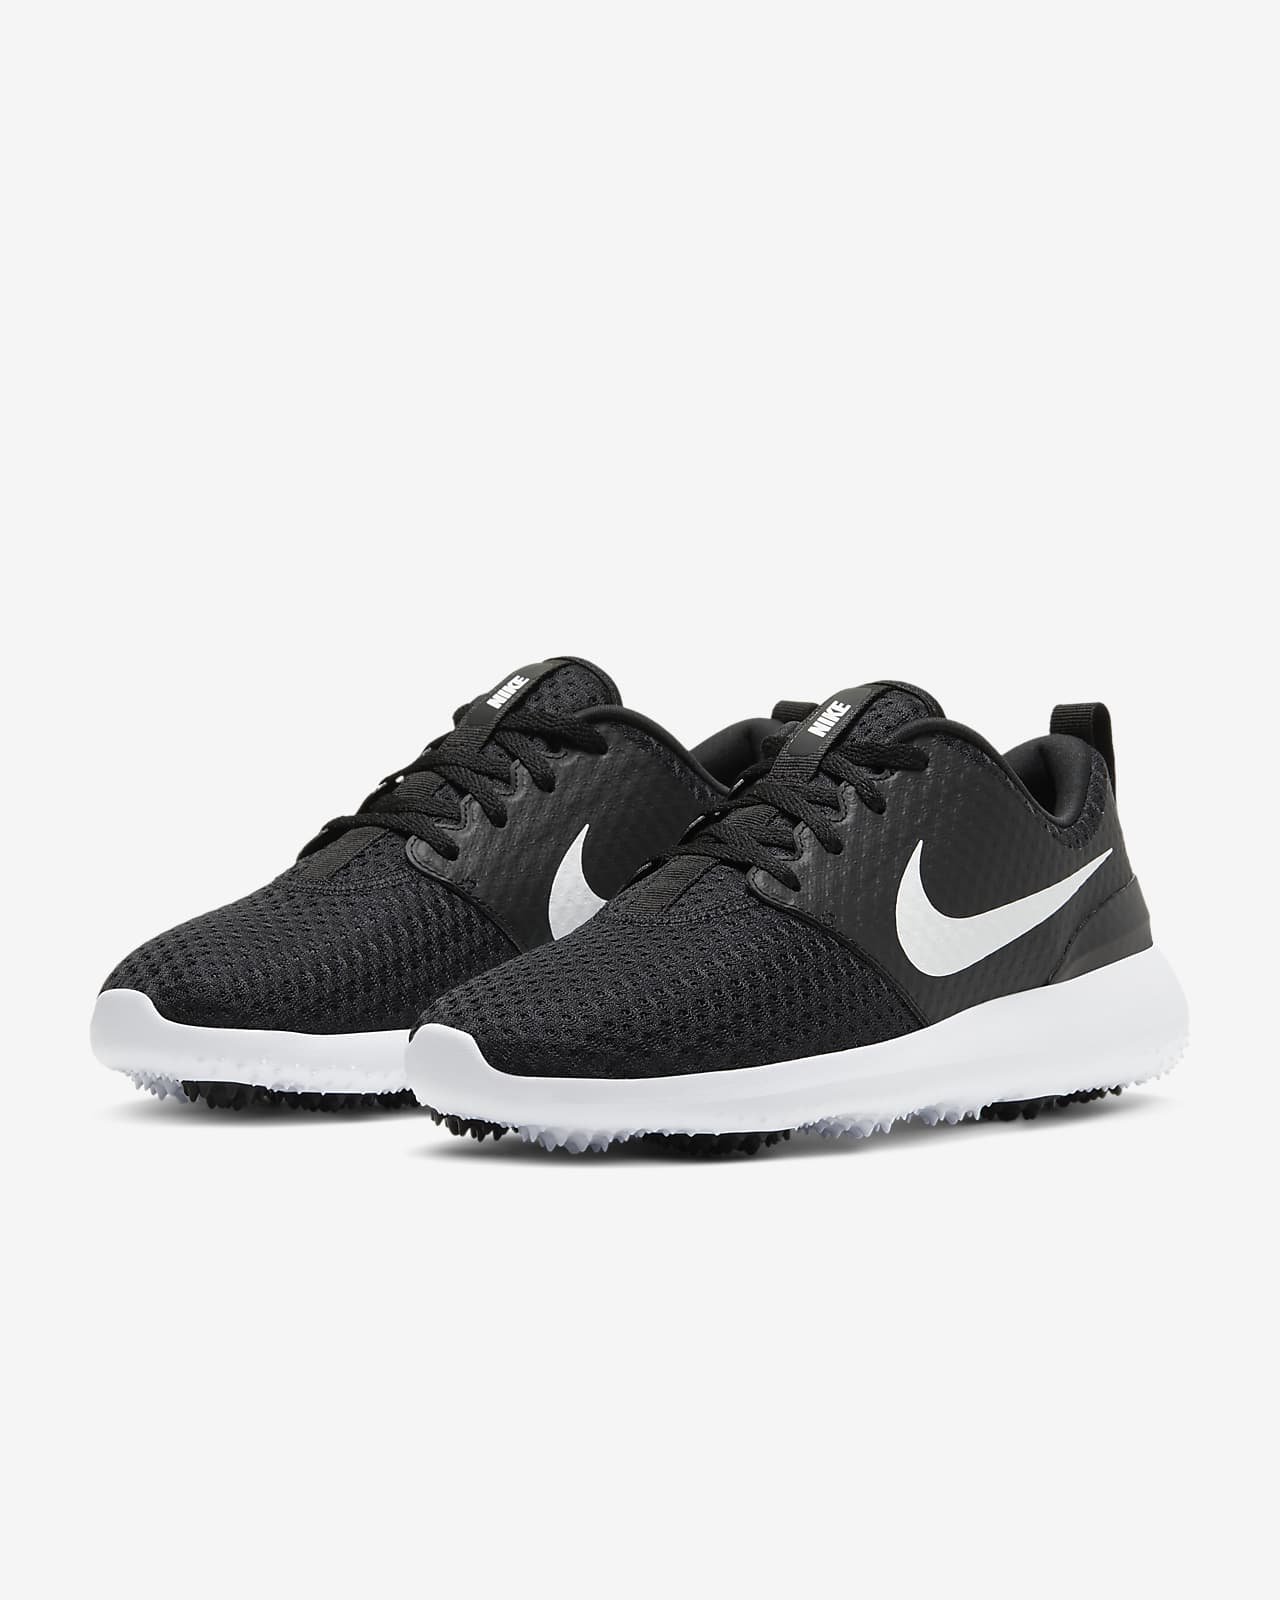 roshes shoes black and white